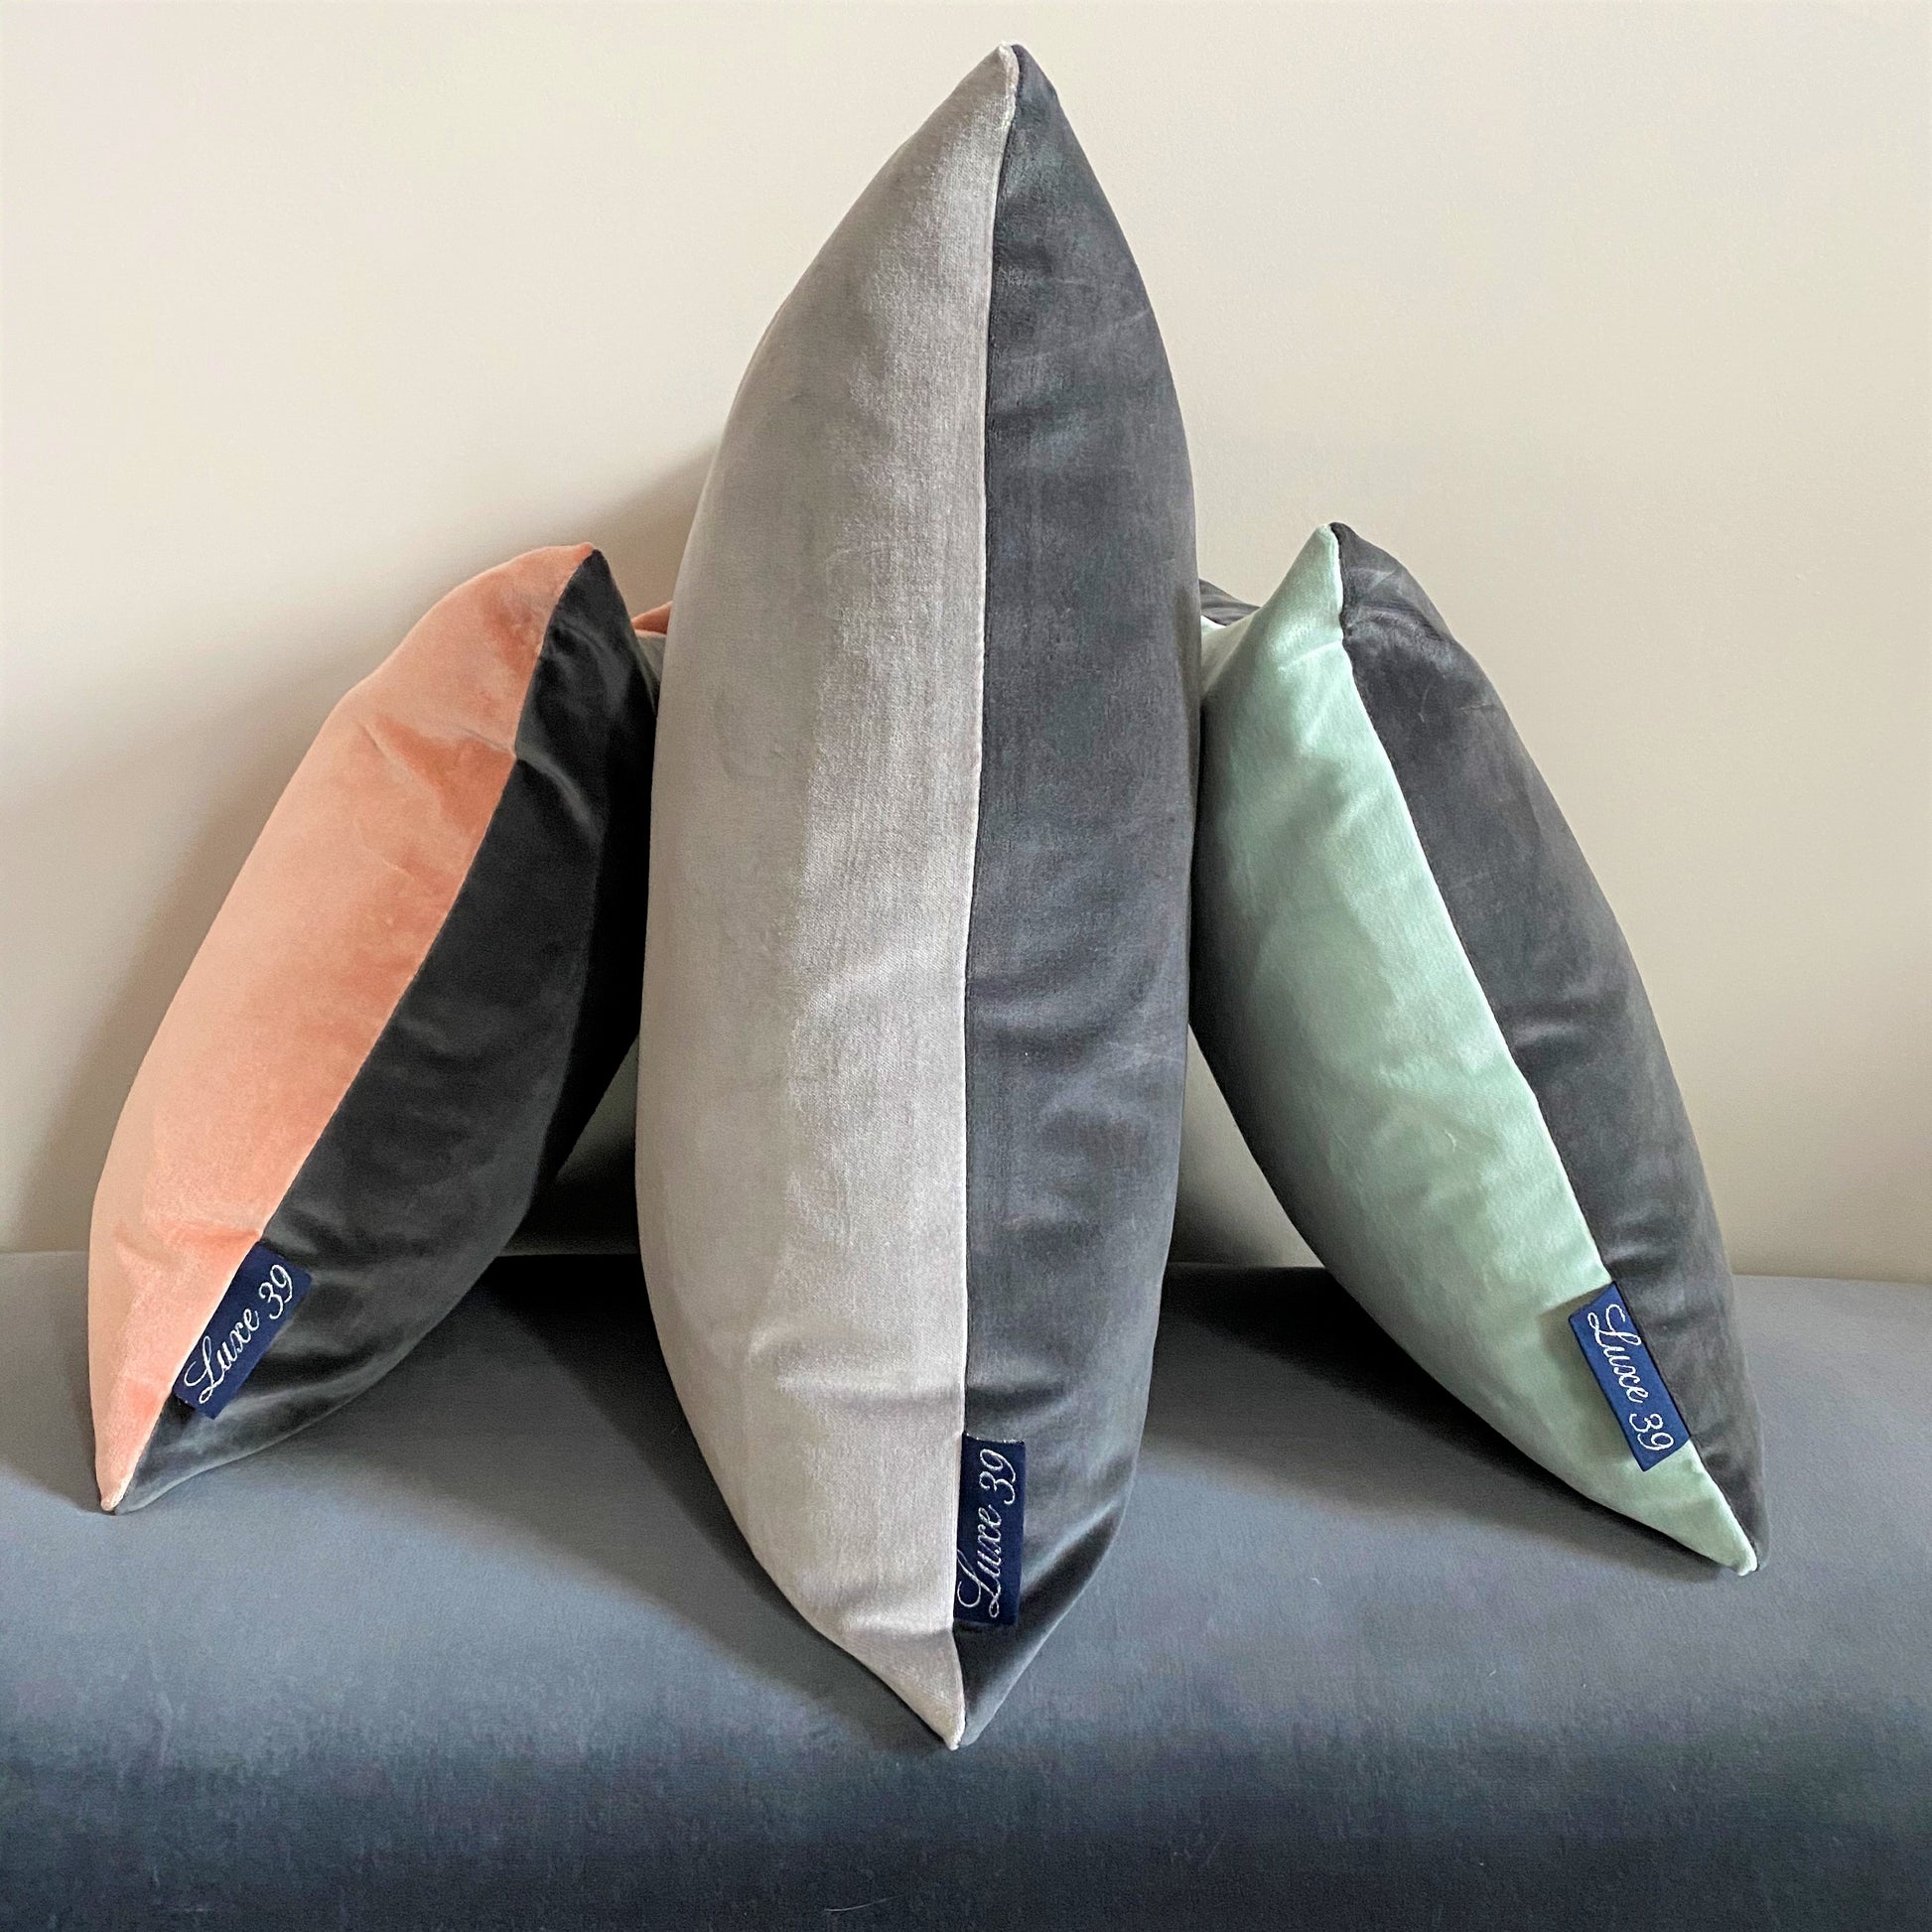 grey cushion covers luxe 39